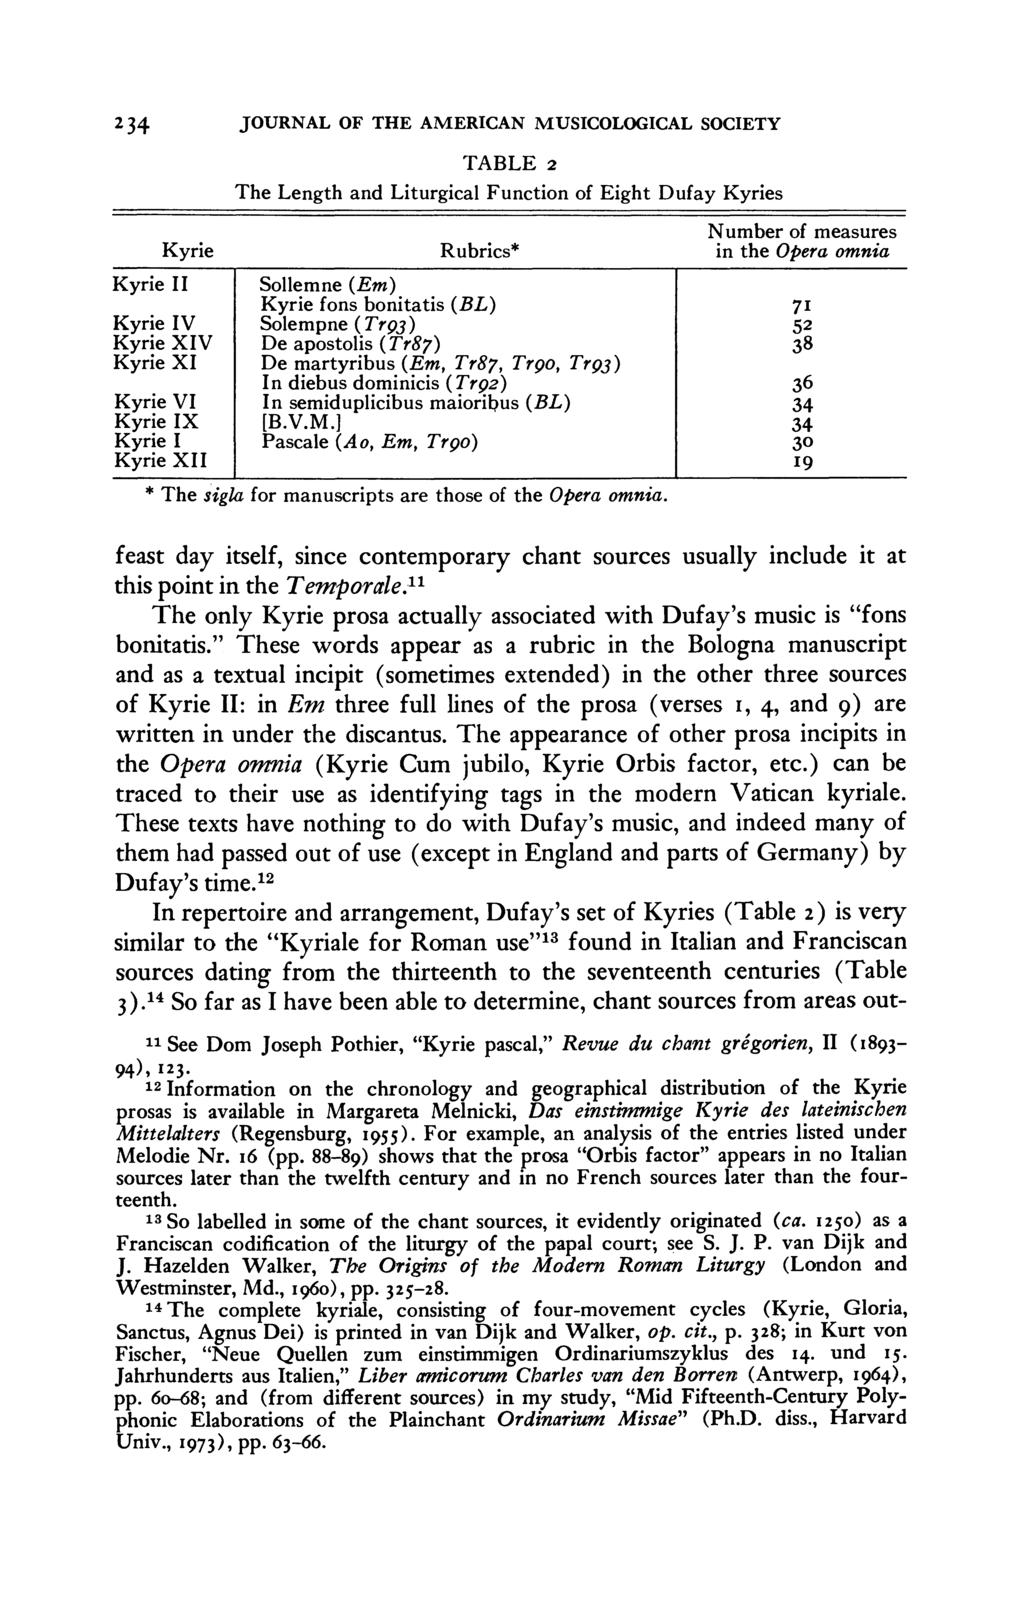 234 JOURNAL OF THE AMERICAN MUSICOLOGICAL SOCIETY TABLE 2 The Length and Liturgical Function of Eight Dufay Kyries Number of measures Kyrie Rubrics* in the Opera omnia Kyrie II Sollemne (Em) Kyrie